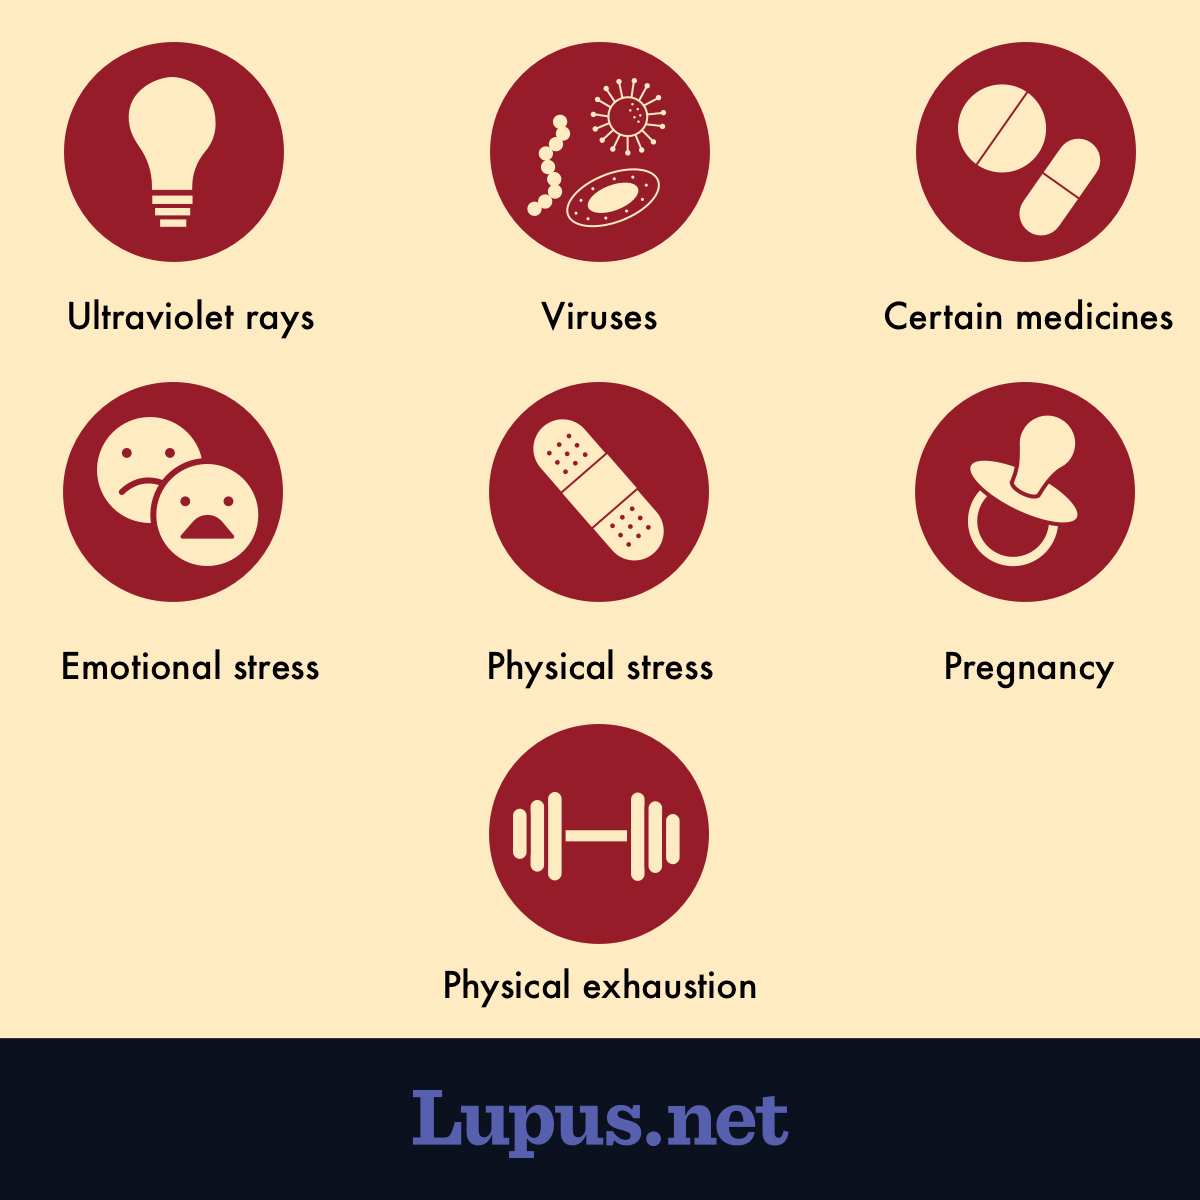 Image showing lupus flare triggers. Includes icons to illustrate ultraviolet rays, viruses, certain medicines, emotional stress, physical stress, pregnancy, and physical exhaustion